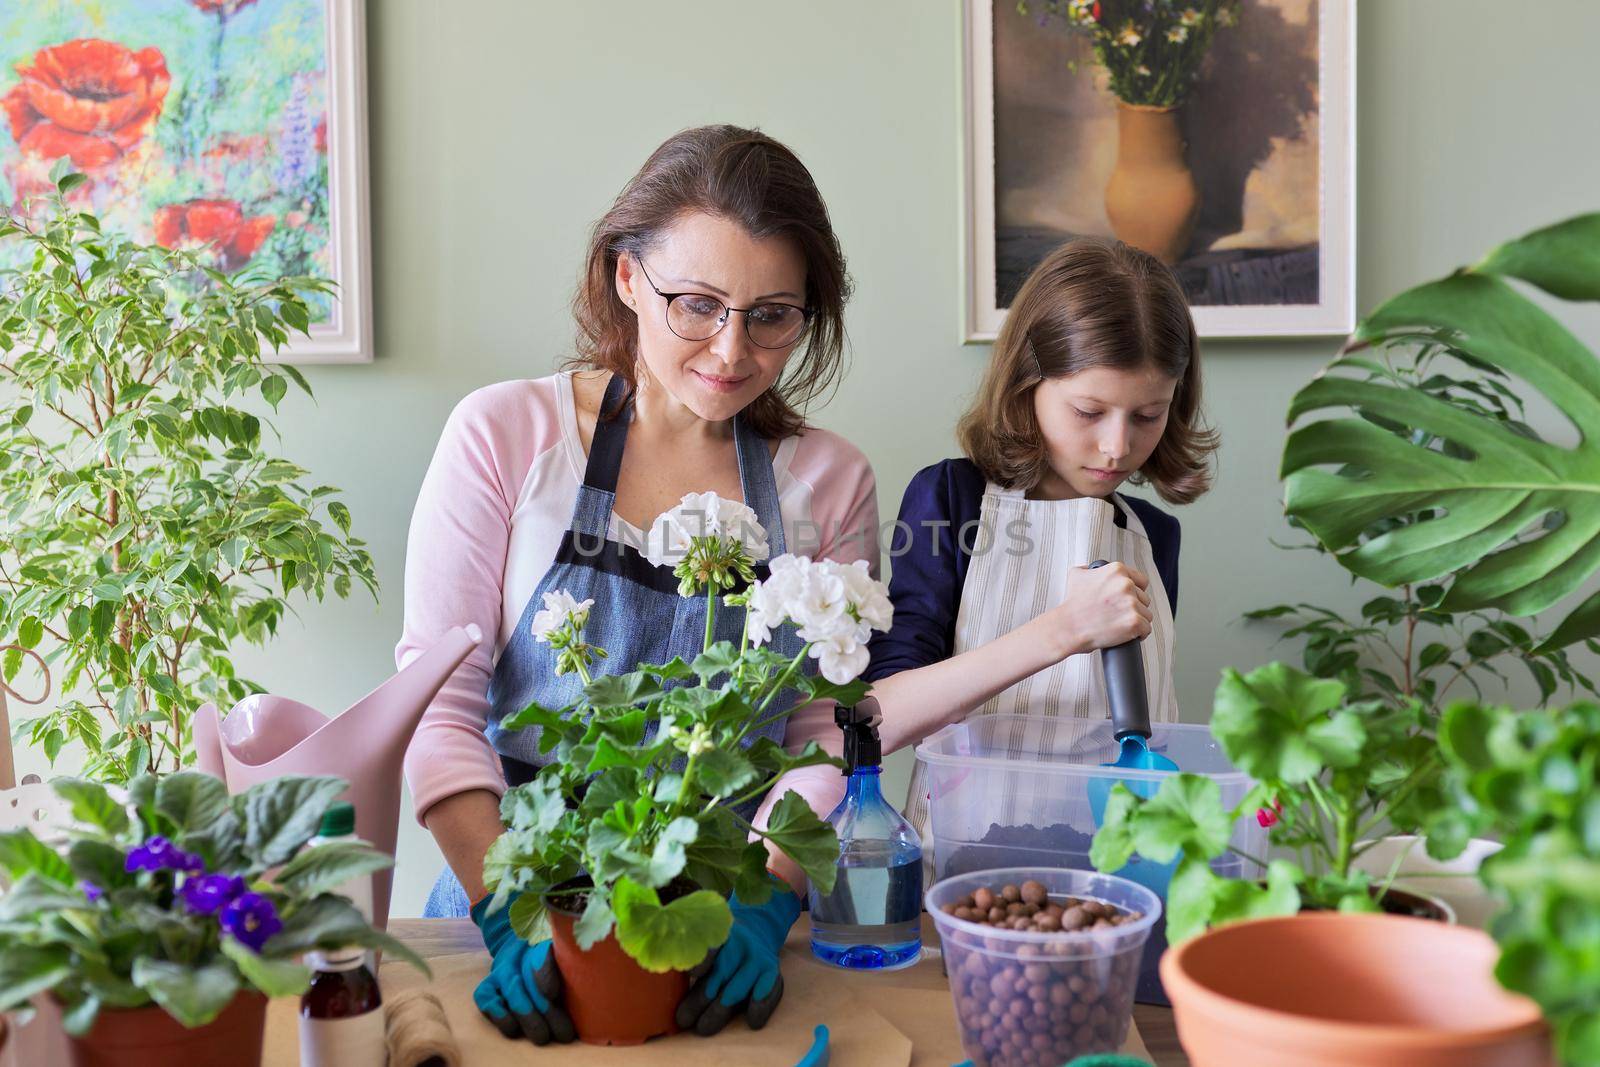 Mother and daughter child plant potted plants, flowers. Hobbies and leisure, care, family, houseplant, home potted friends concept